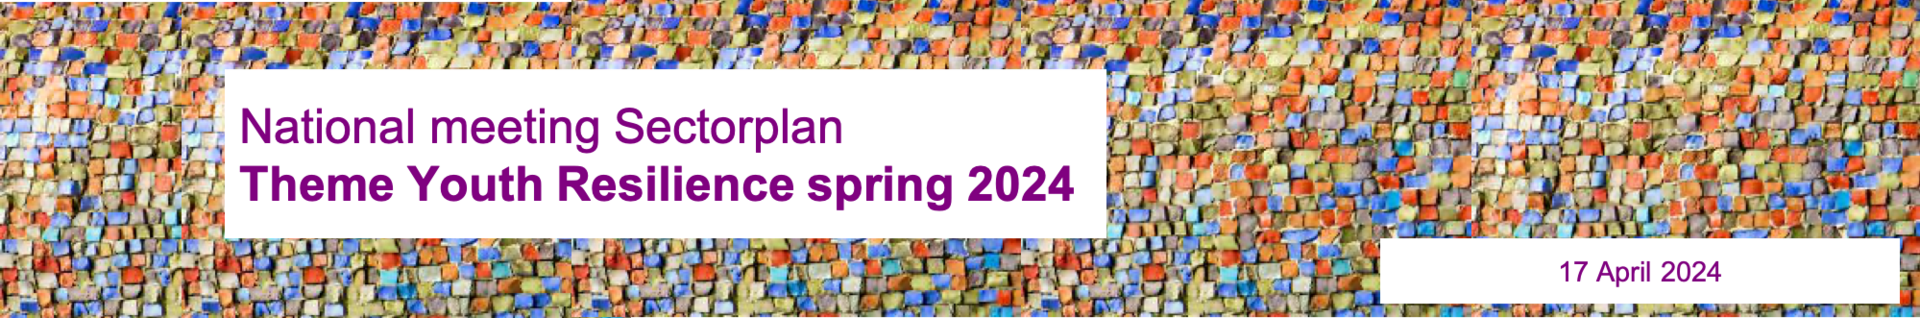 National meeting Sectorplan Theme Youth Resilience spring 2024